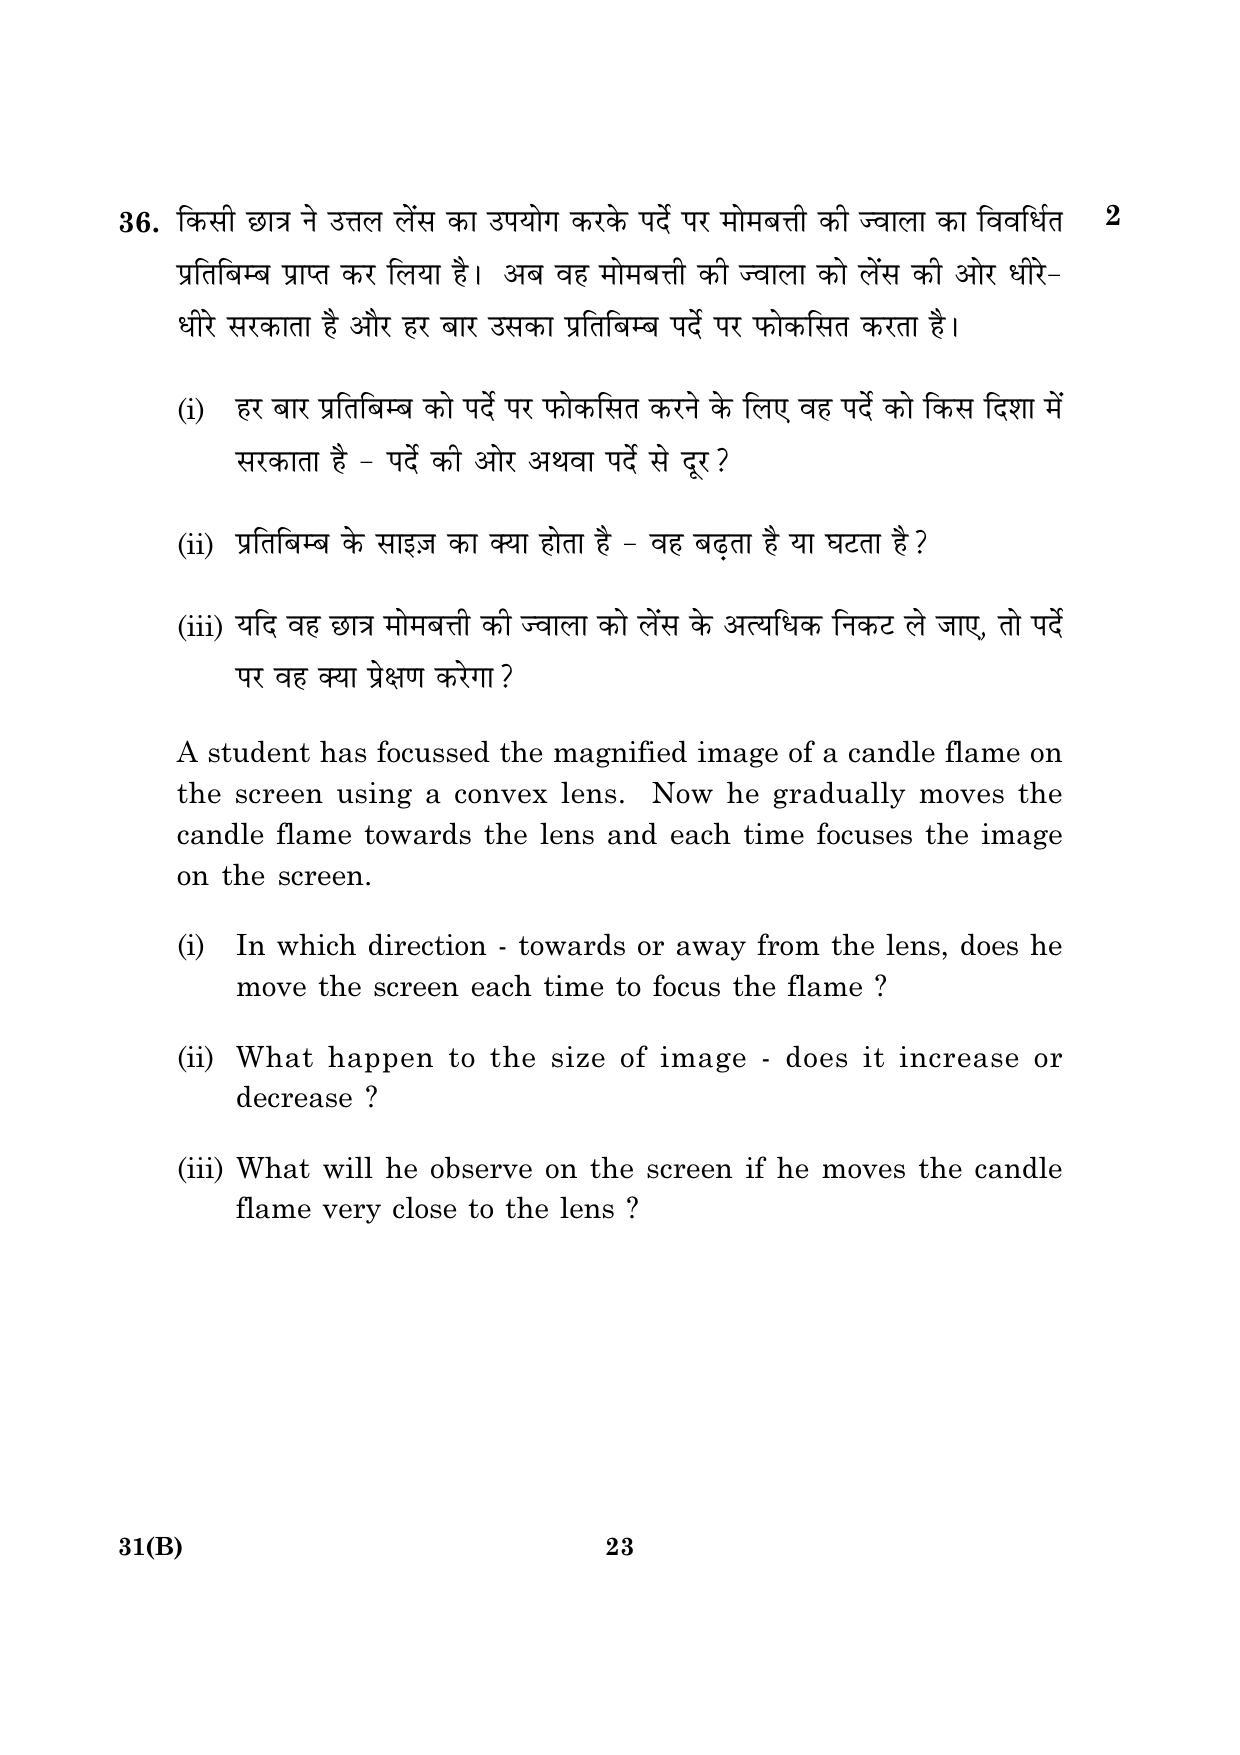 CBSE Class 10 031(B) Science 2016 Question Paper - Page 23